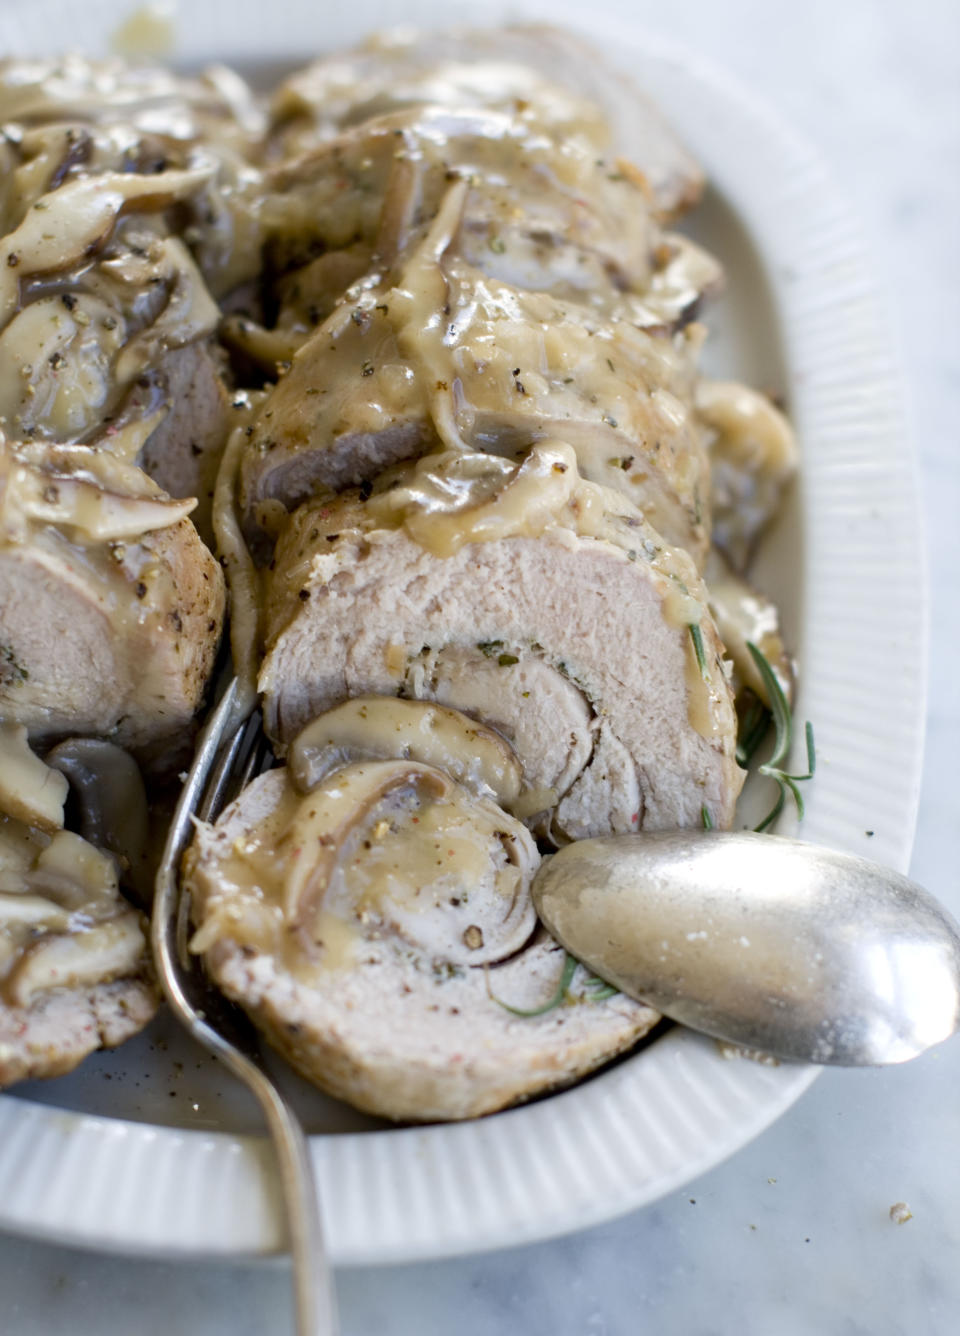 This Nov. 18, 2013 photo shows double pork roast with mushroom marsala sauce in Concord, N.H. (AP Photo/Matthew Mead)